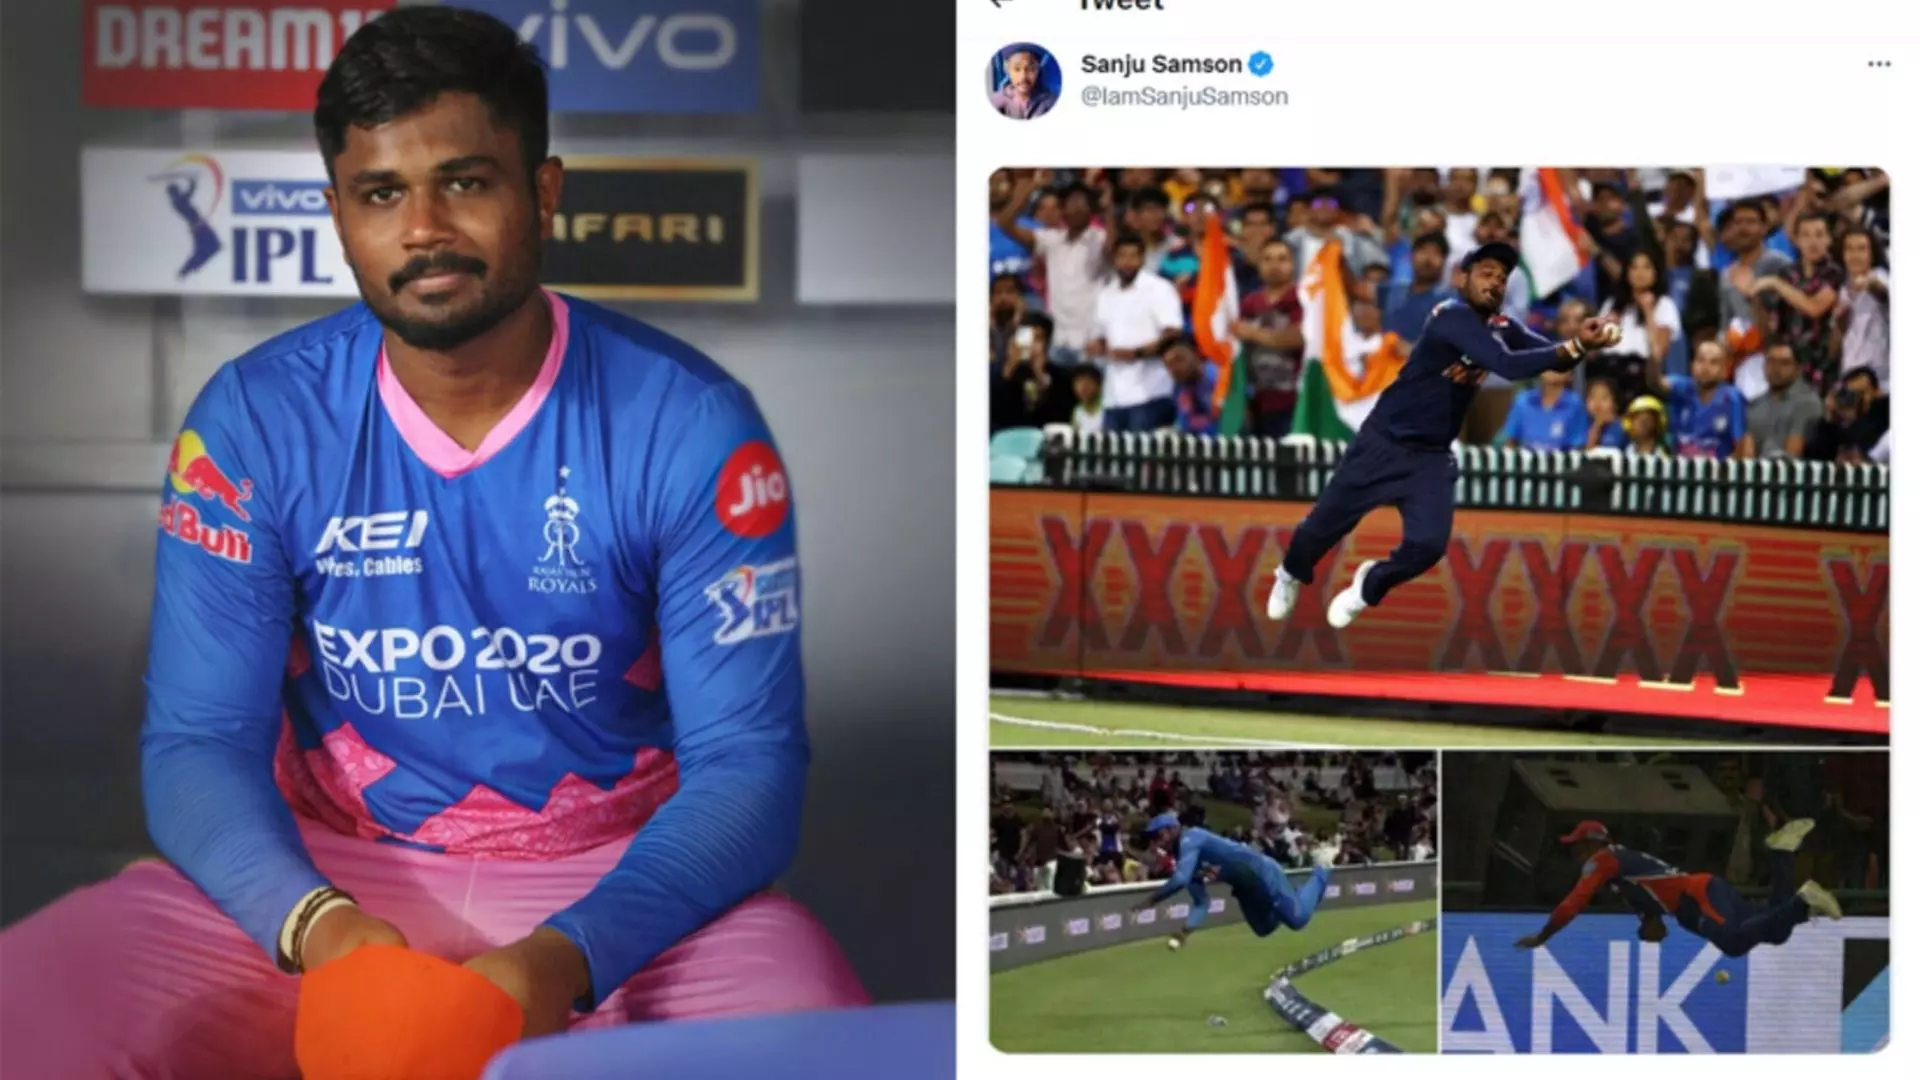 Sanju Samson Satire on BCCI that Iam Not only Keeper Iam Good Fielder Too By Posting Photos in Twitter